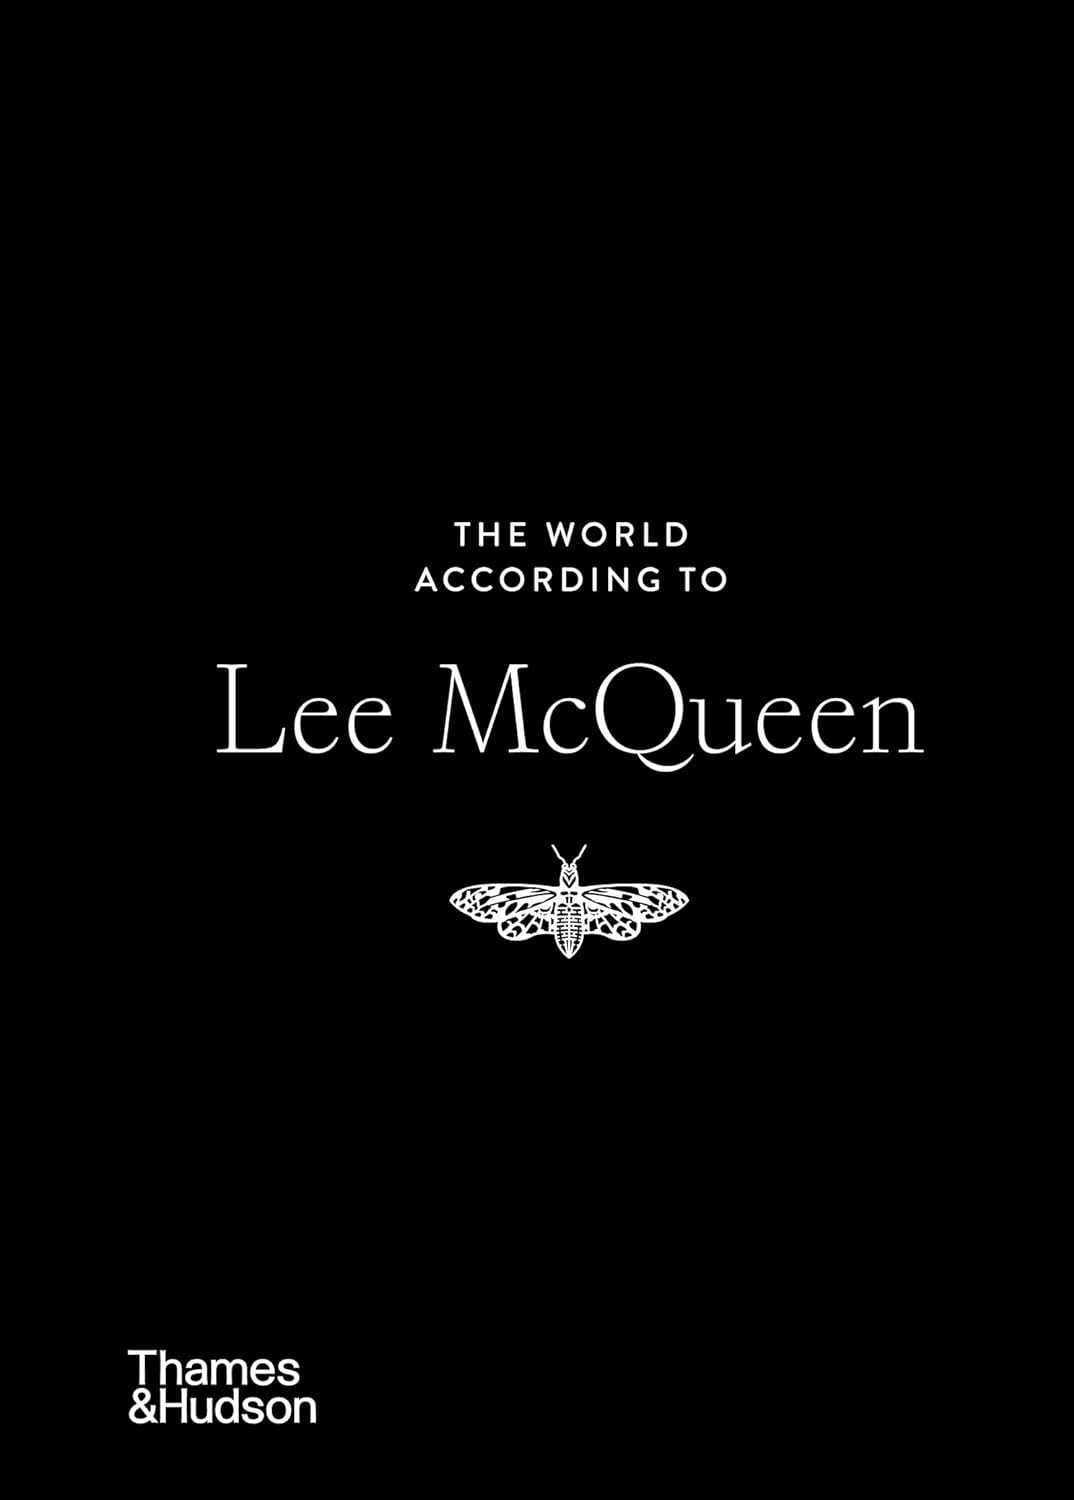 The World According to Lee McQueen explore the world discoveries that shaped our world